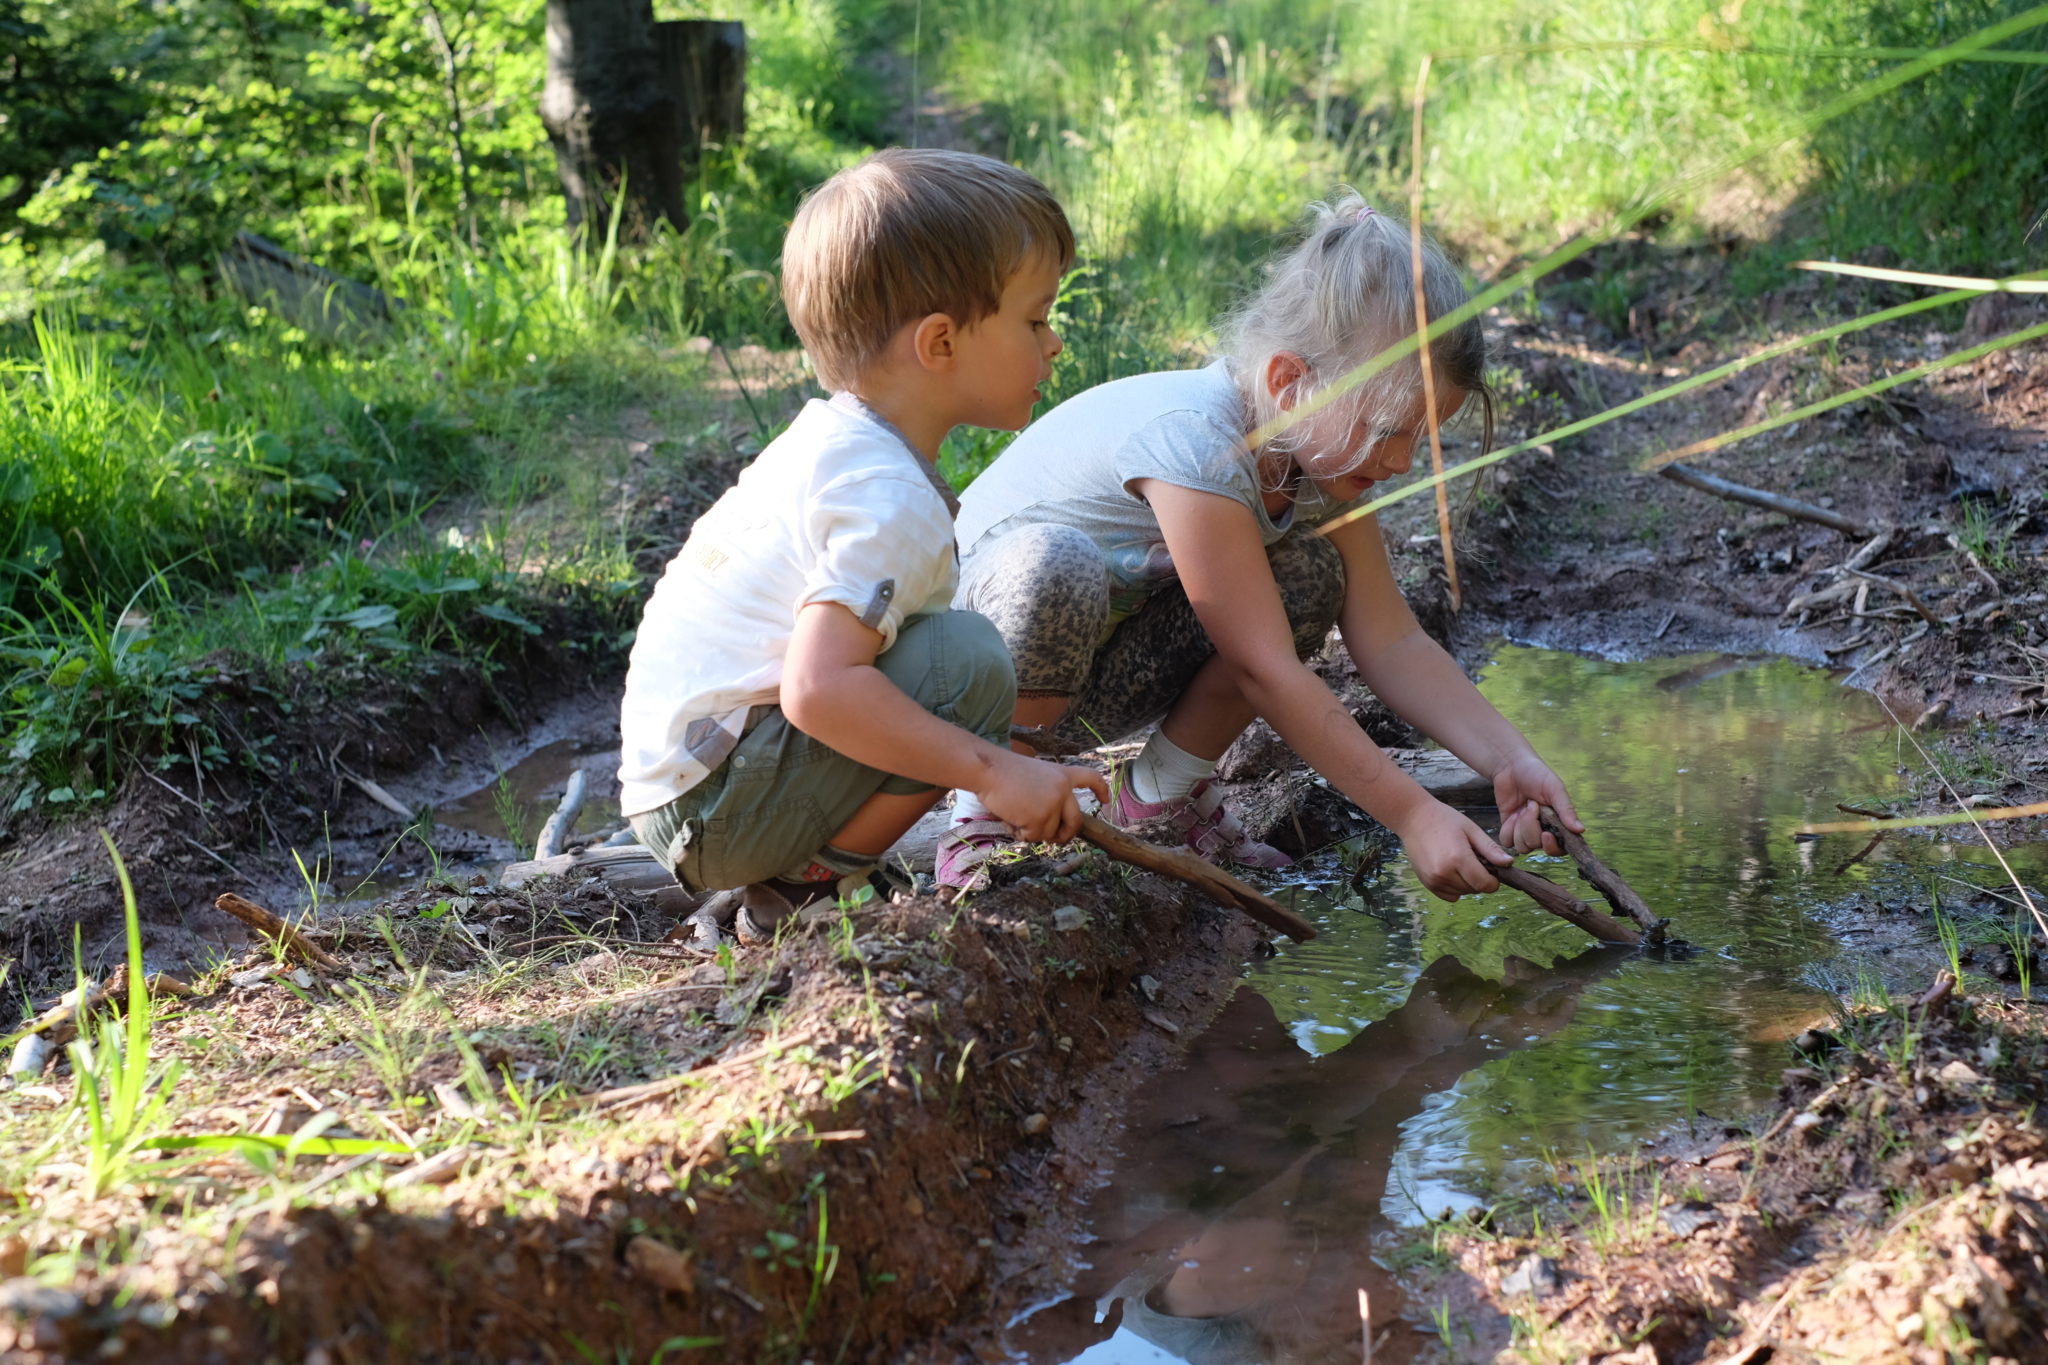 Yep, they are picking at a muddy puddle full with baby frogs. Photo by: Exploring Slovenia.